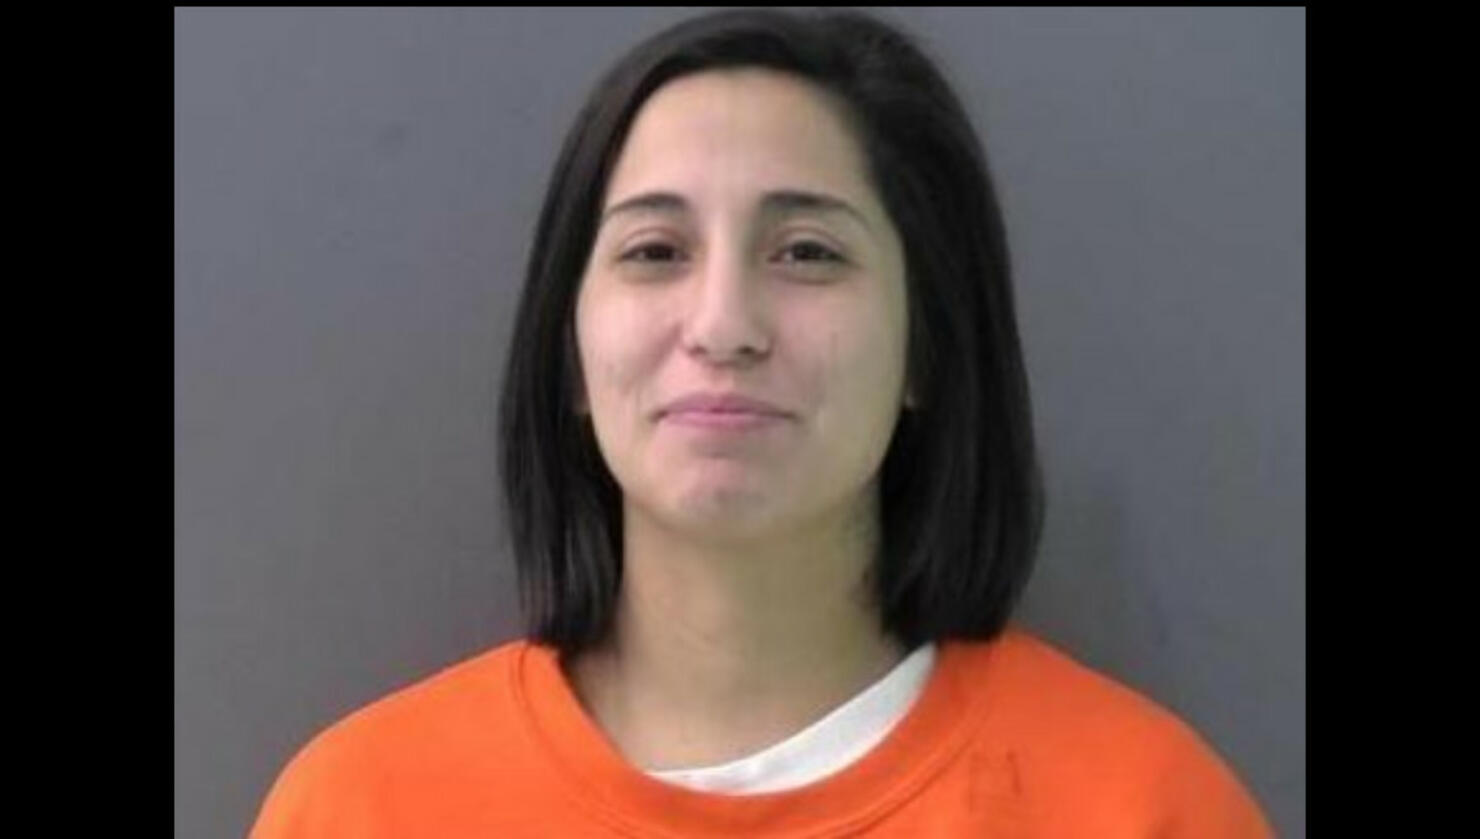 Texas woman arrested after twerking while naked on 